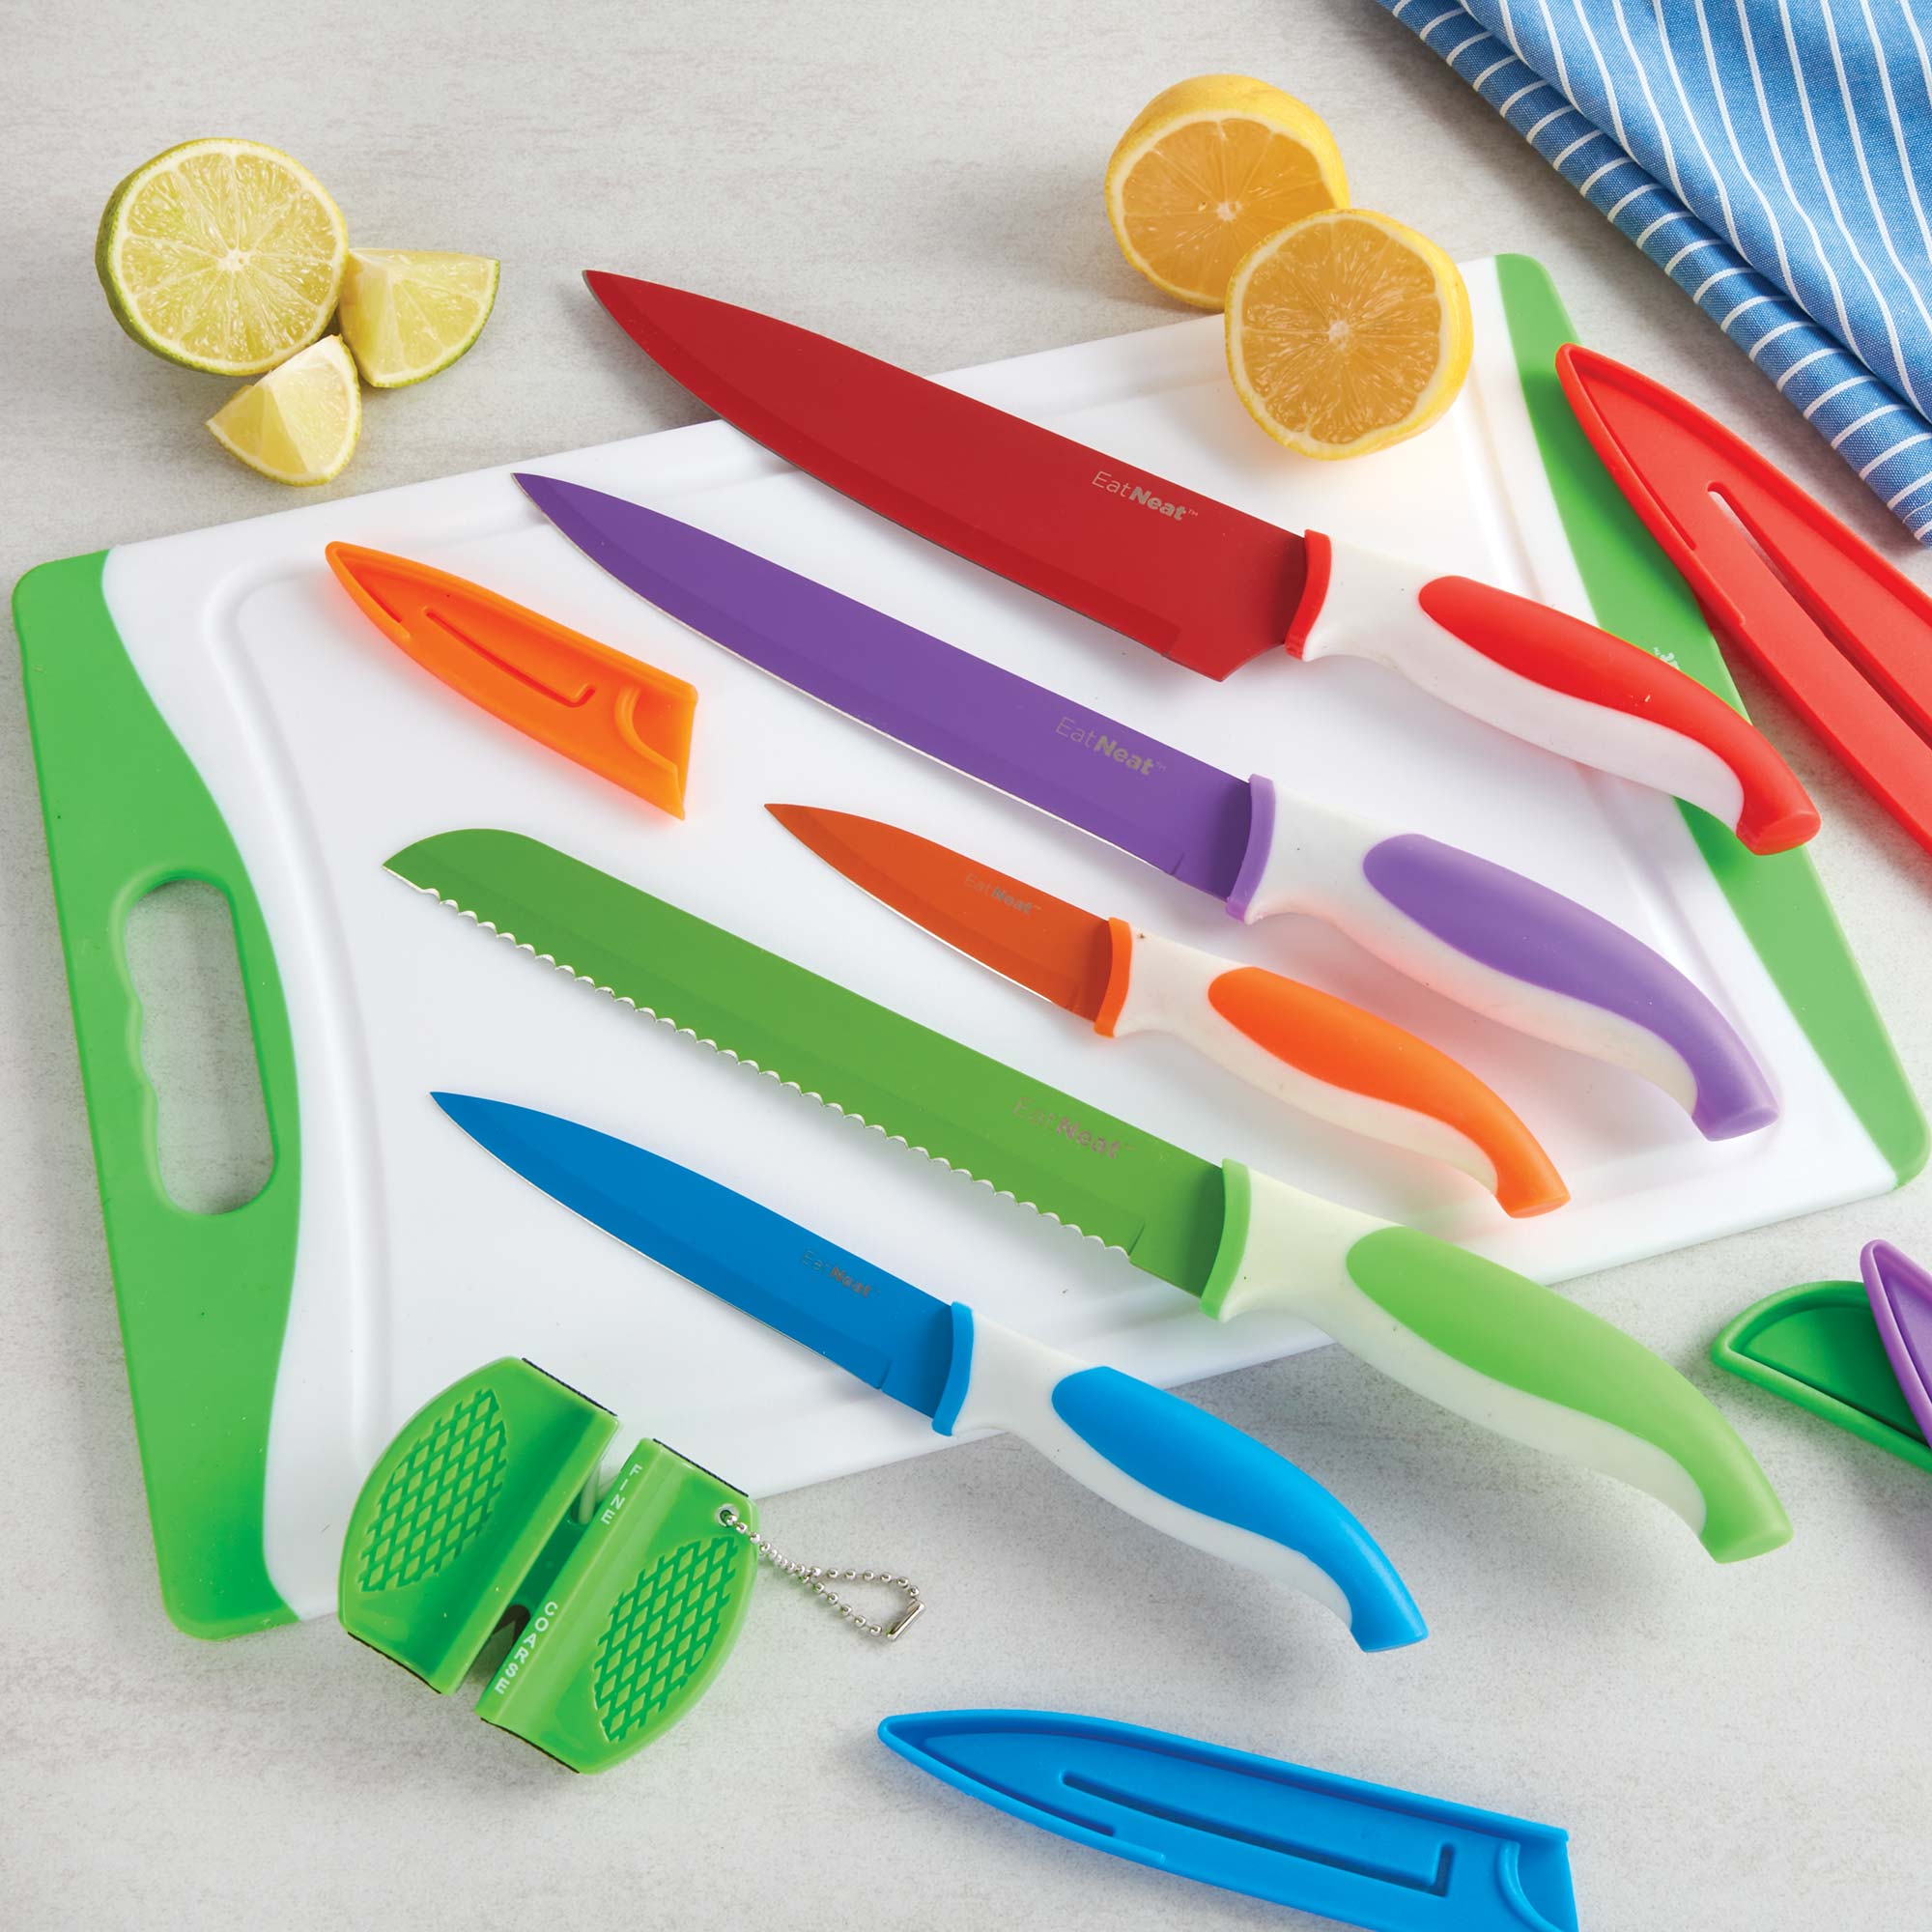 EATNEAT EatNeat 12-Piece Colorful Kitchen Knife Set - 5 Colored Stainless  Steel Knives with Sheaths, Cutting Board, and a Sharpener - Ra